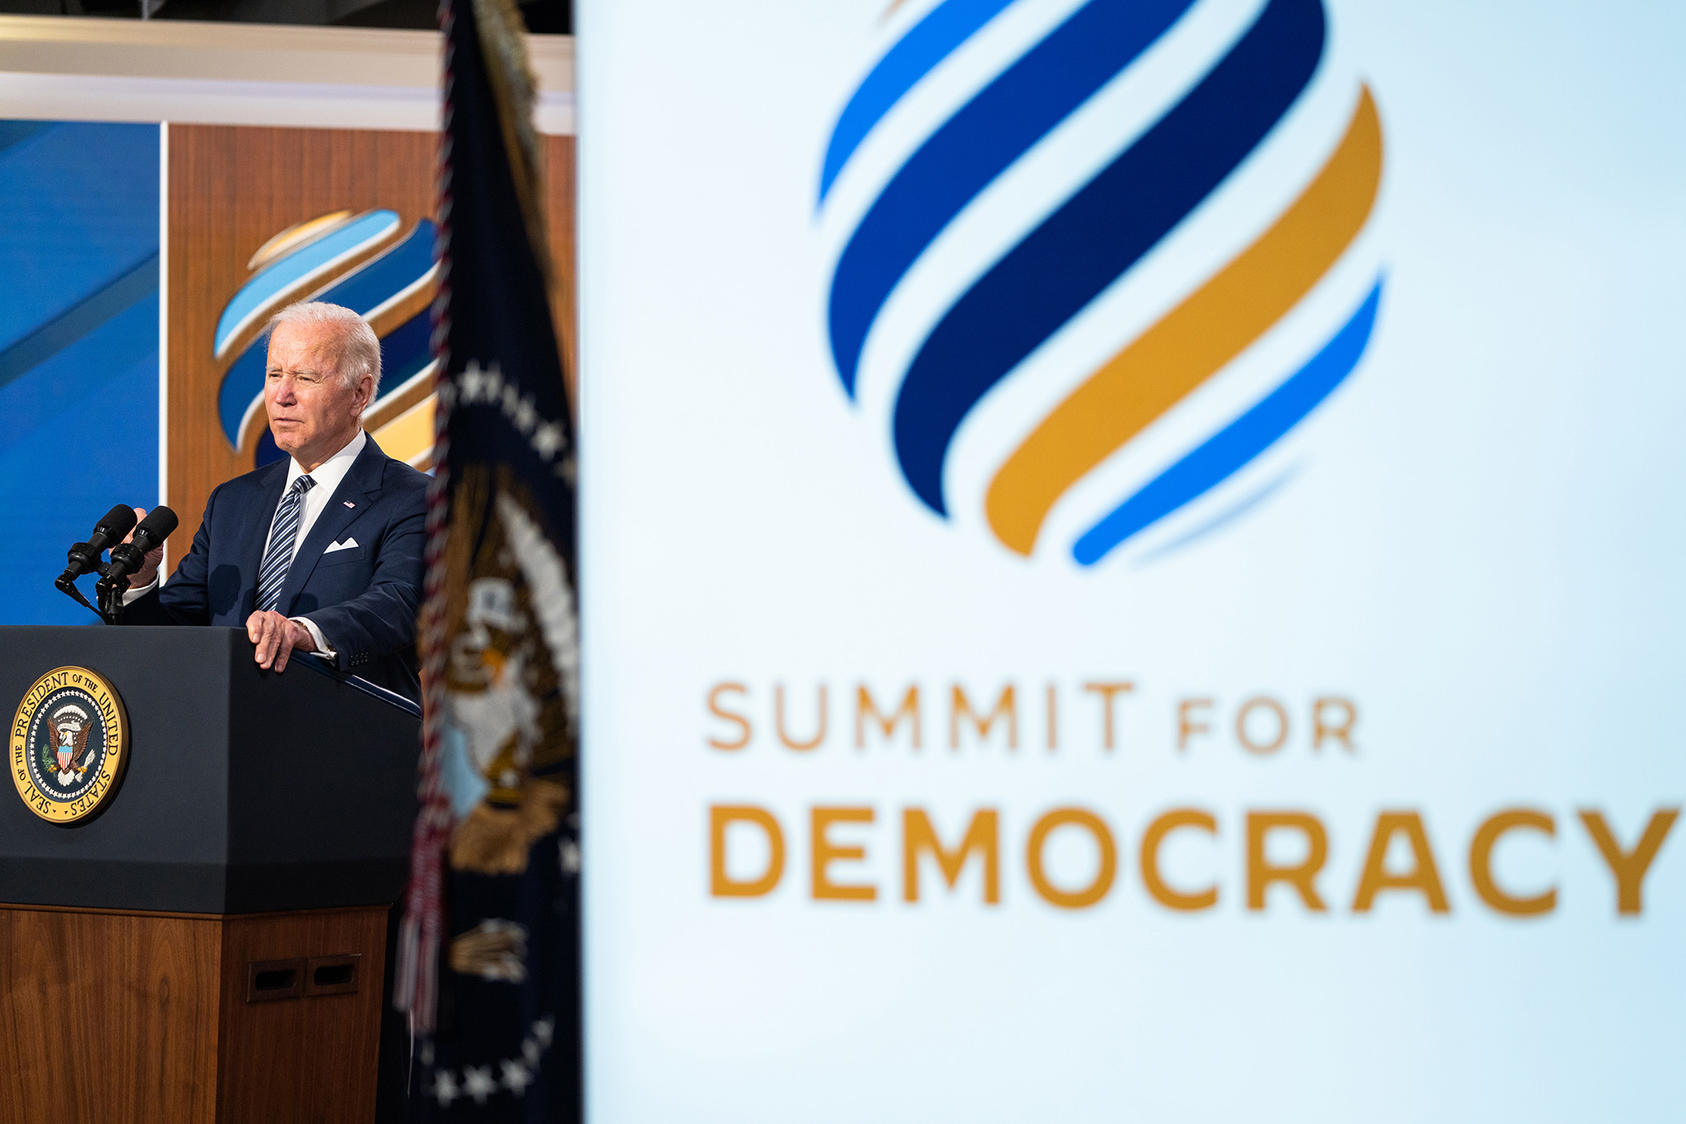 President Joe Biden makes closing remarks at the virtual Summit for Democracy, in the South Court Auditorium of the Eisenhower Executive Office Building on the White House grounds in Washington on Dec. 10, 2021. (Sarahbeth Maney/The New York Times)